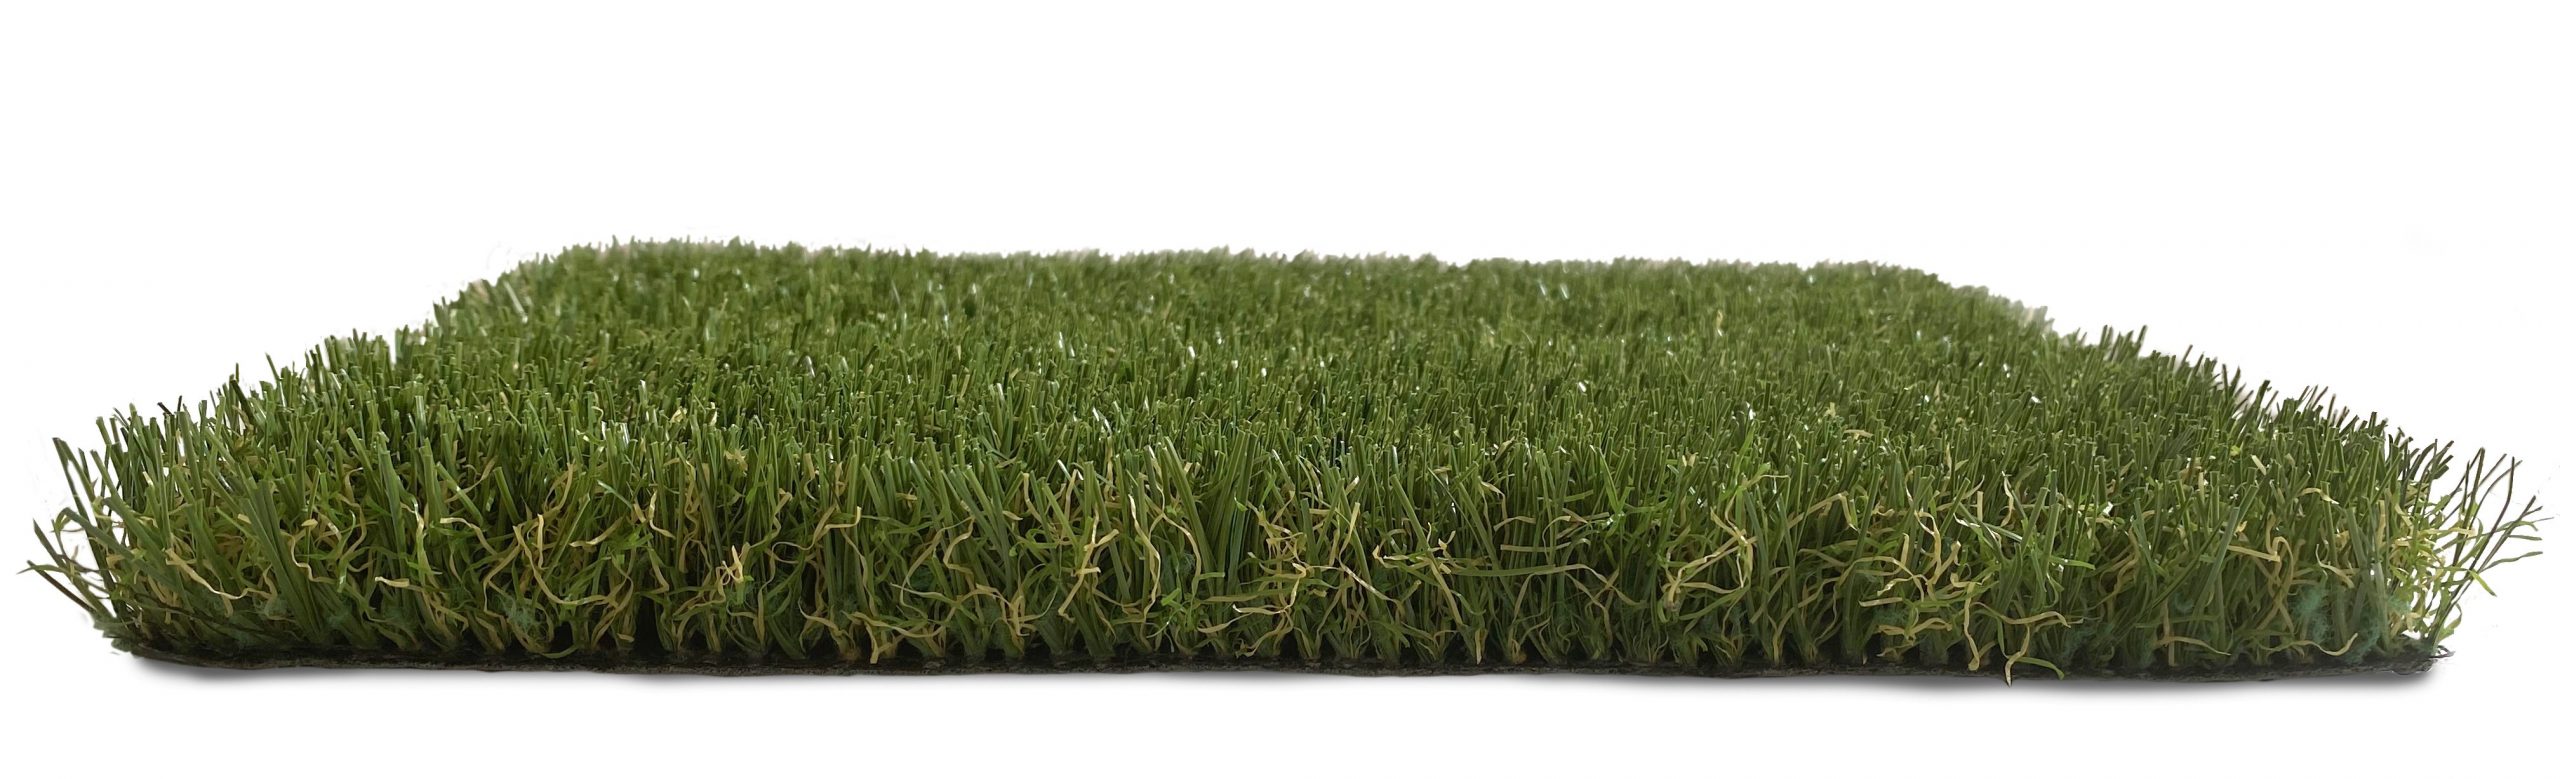 Overview synlawn-pet-turf-system-synthetic-turf-pet-premium-featured-image